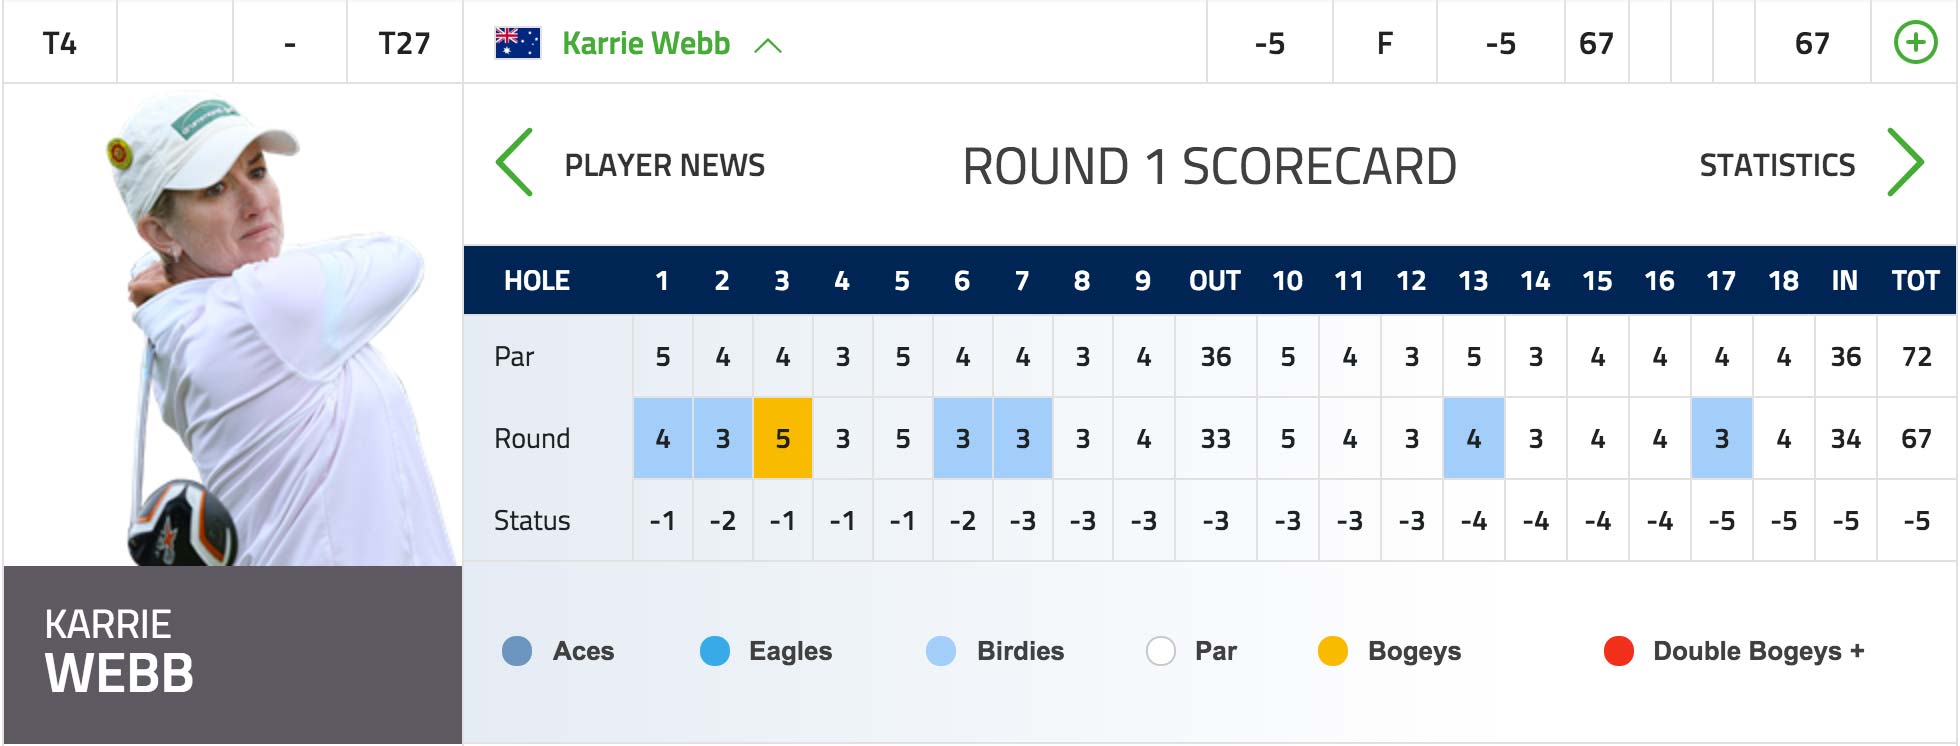 Karrie Webb in contention after the opening round of the 2016 ISPS Handa Women's Australian Open